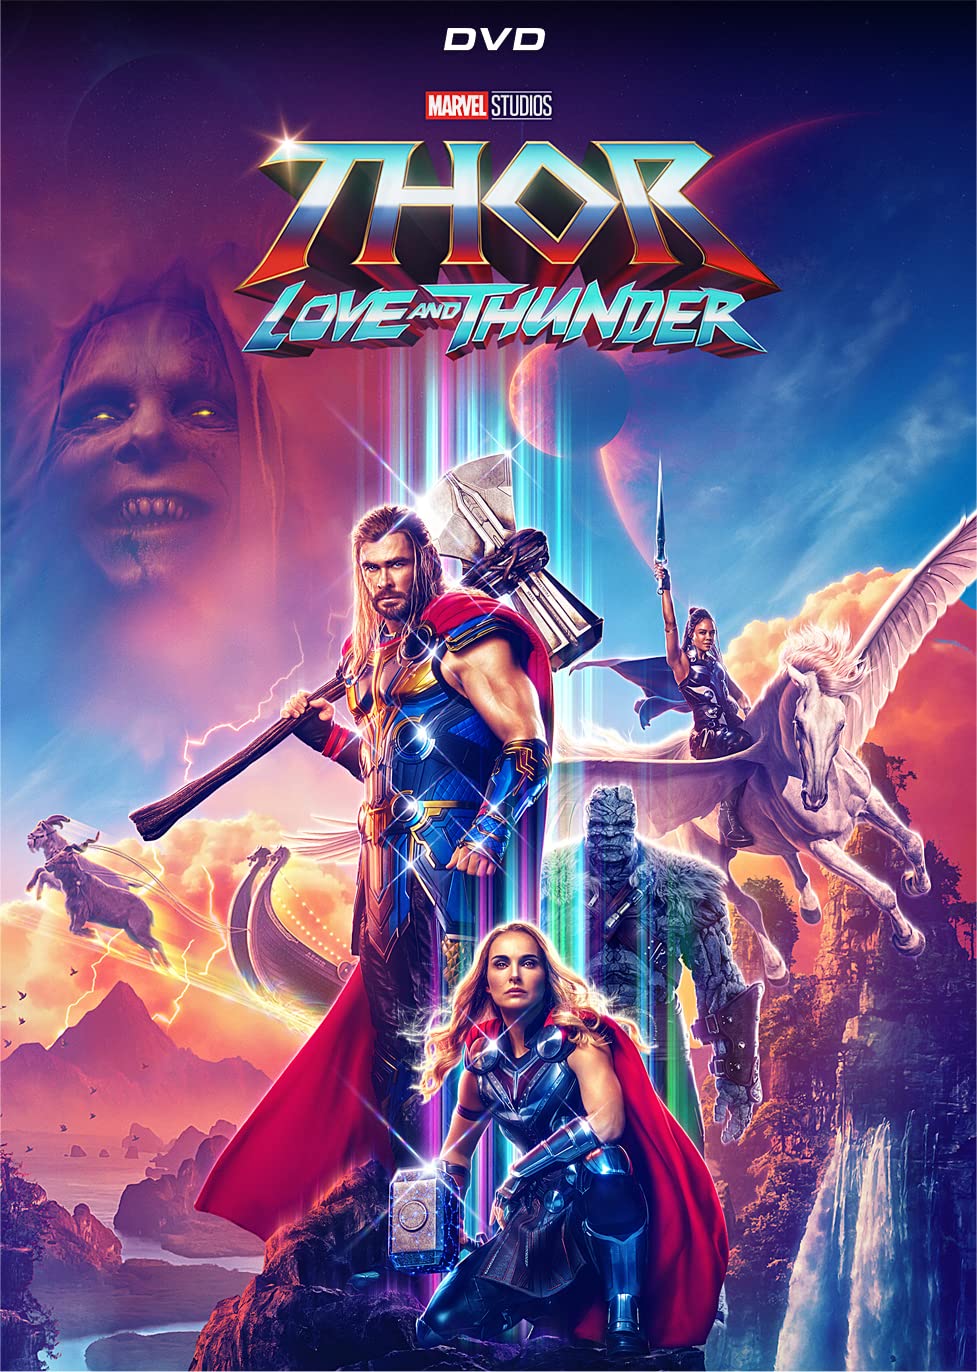 Image for "Thor: Love and Thunder"